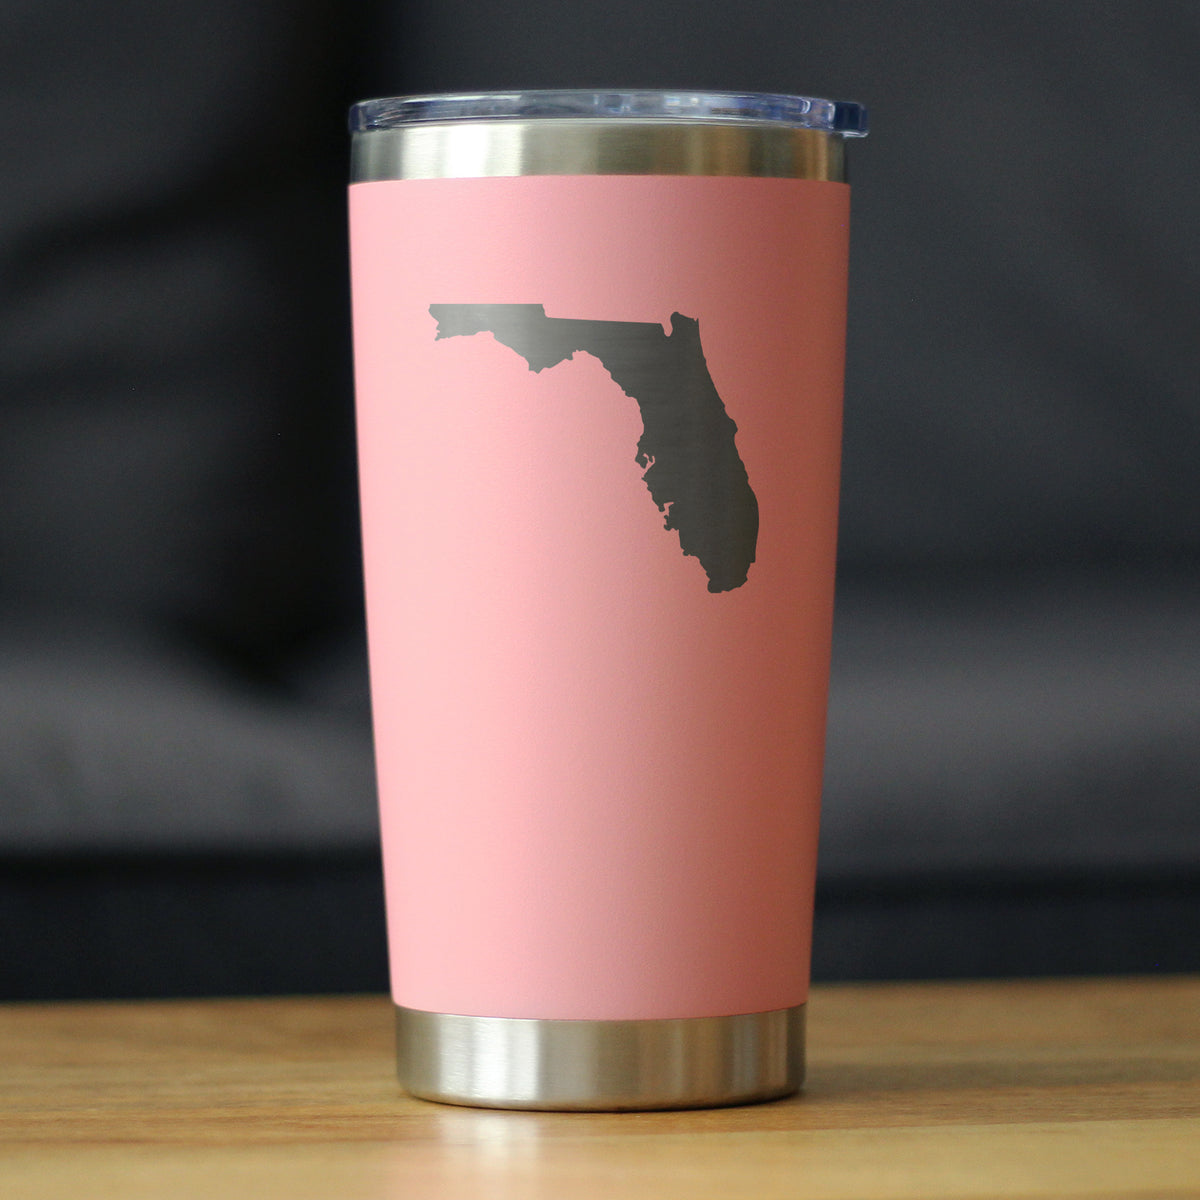 Florida State Outline - Insulated Coffee Tumbler Cup with Sliding Lid - Stainless Steel Coffee Mug - State Themed Outdoor Camping Gifts For Floridians